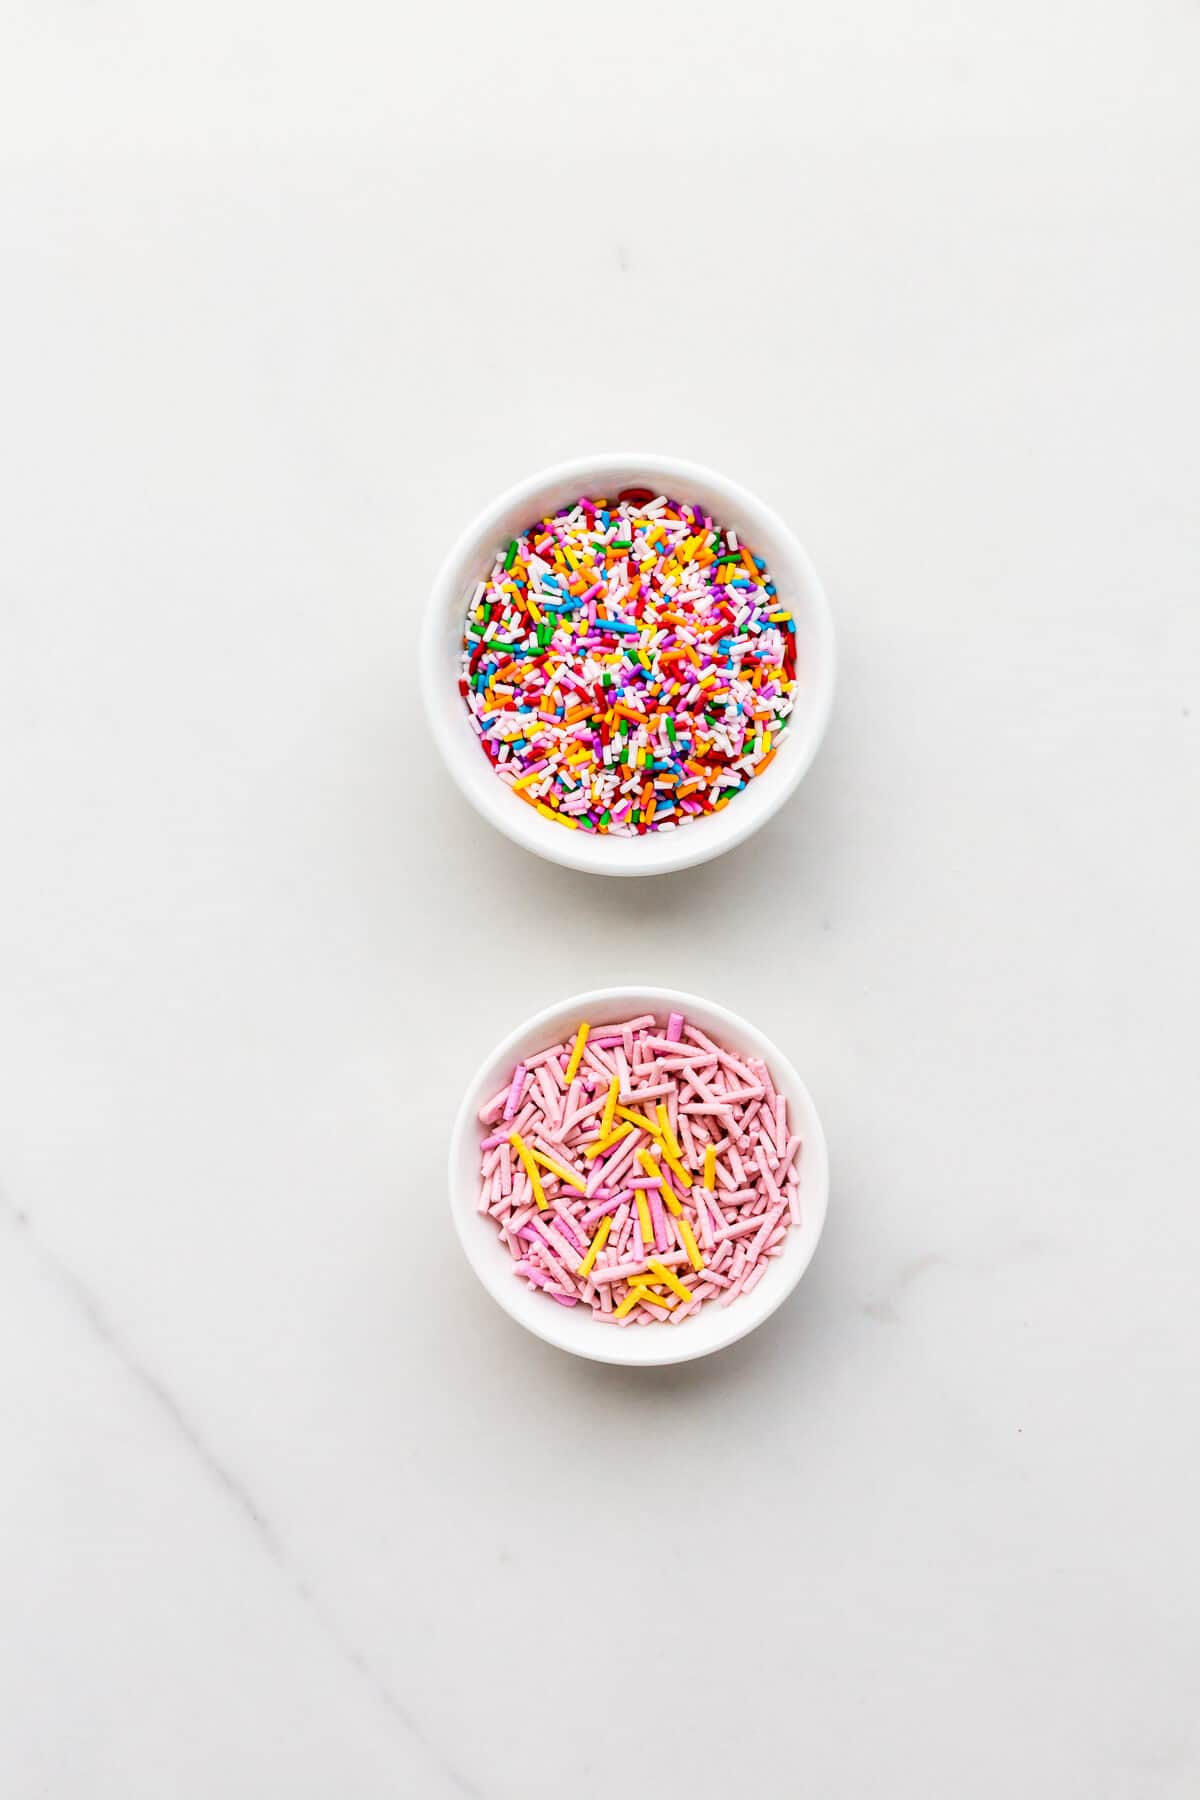 Rainbow jimmies (with vibrant colour) and homemade sprinkles (pastel colours) in small bowls.